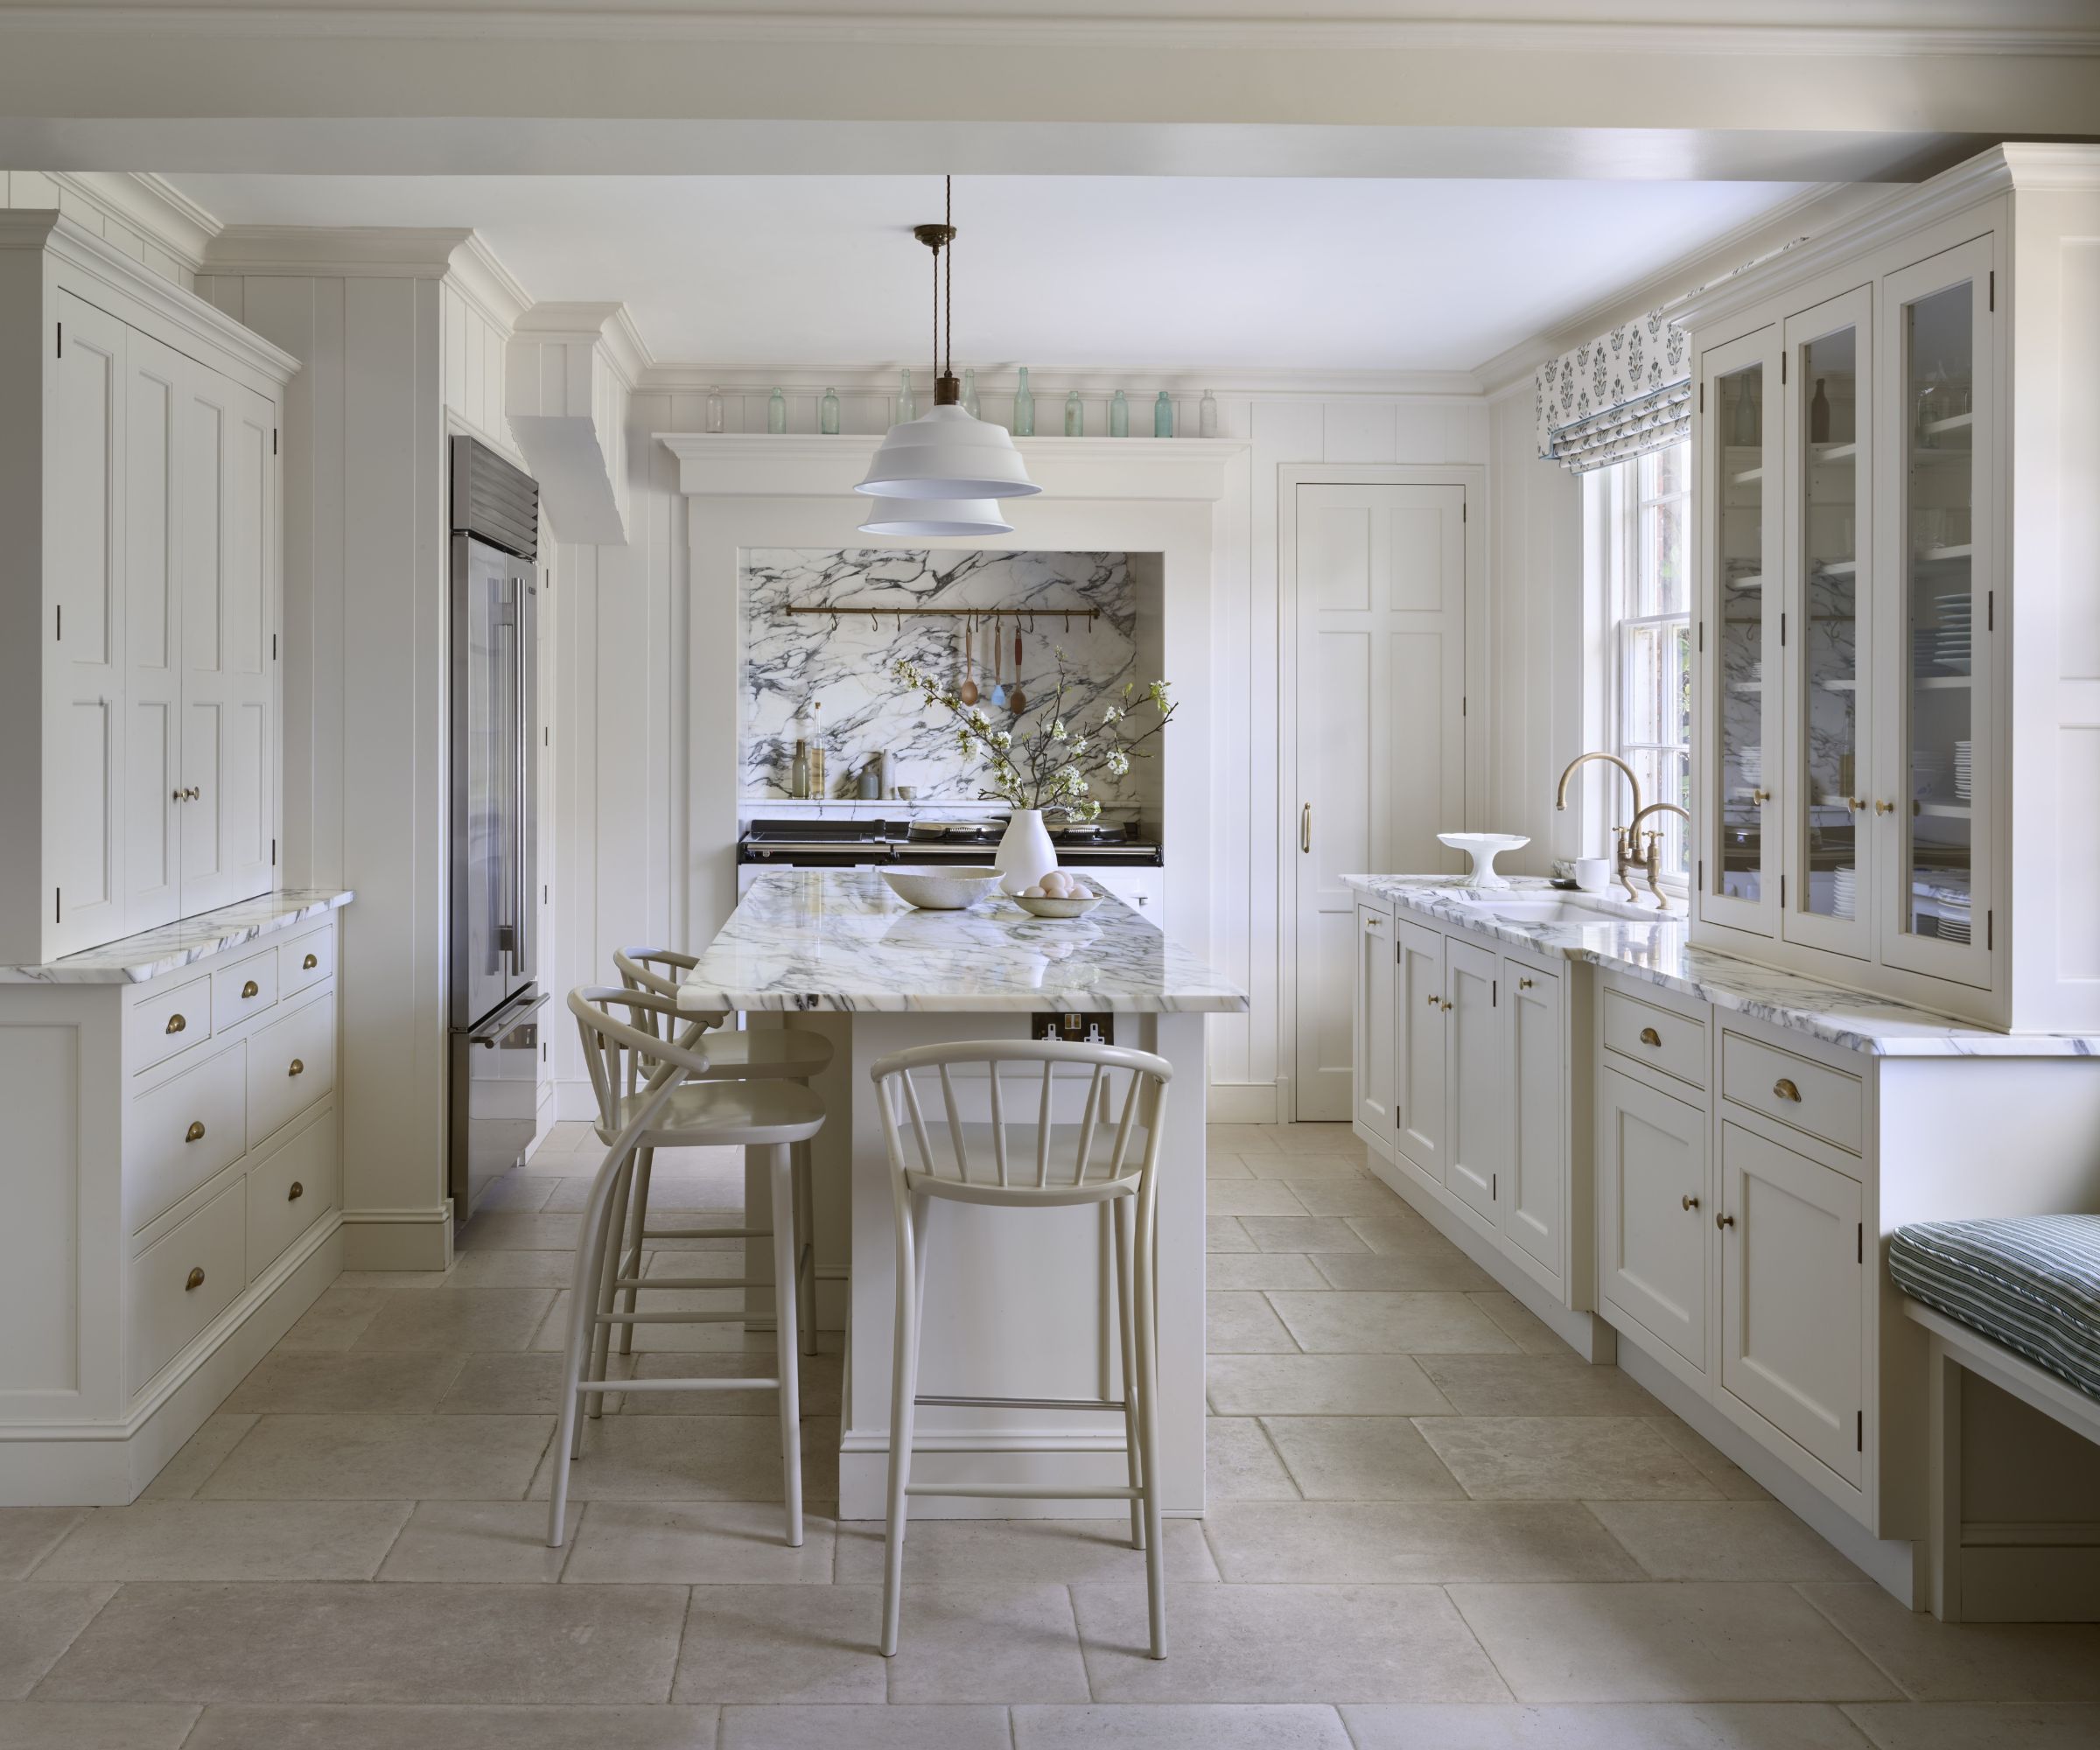 Which kitchen floor tiles are best Your flooring could be ruining your space – here's all the designer know-how you’ll need